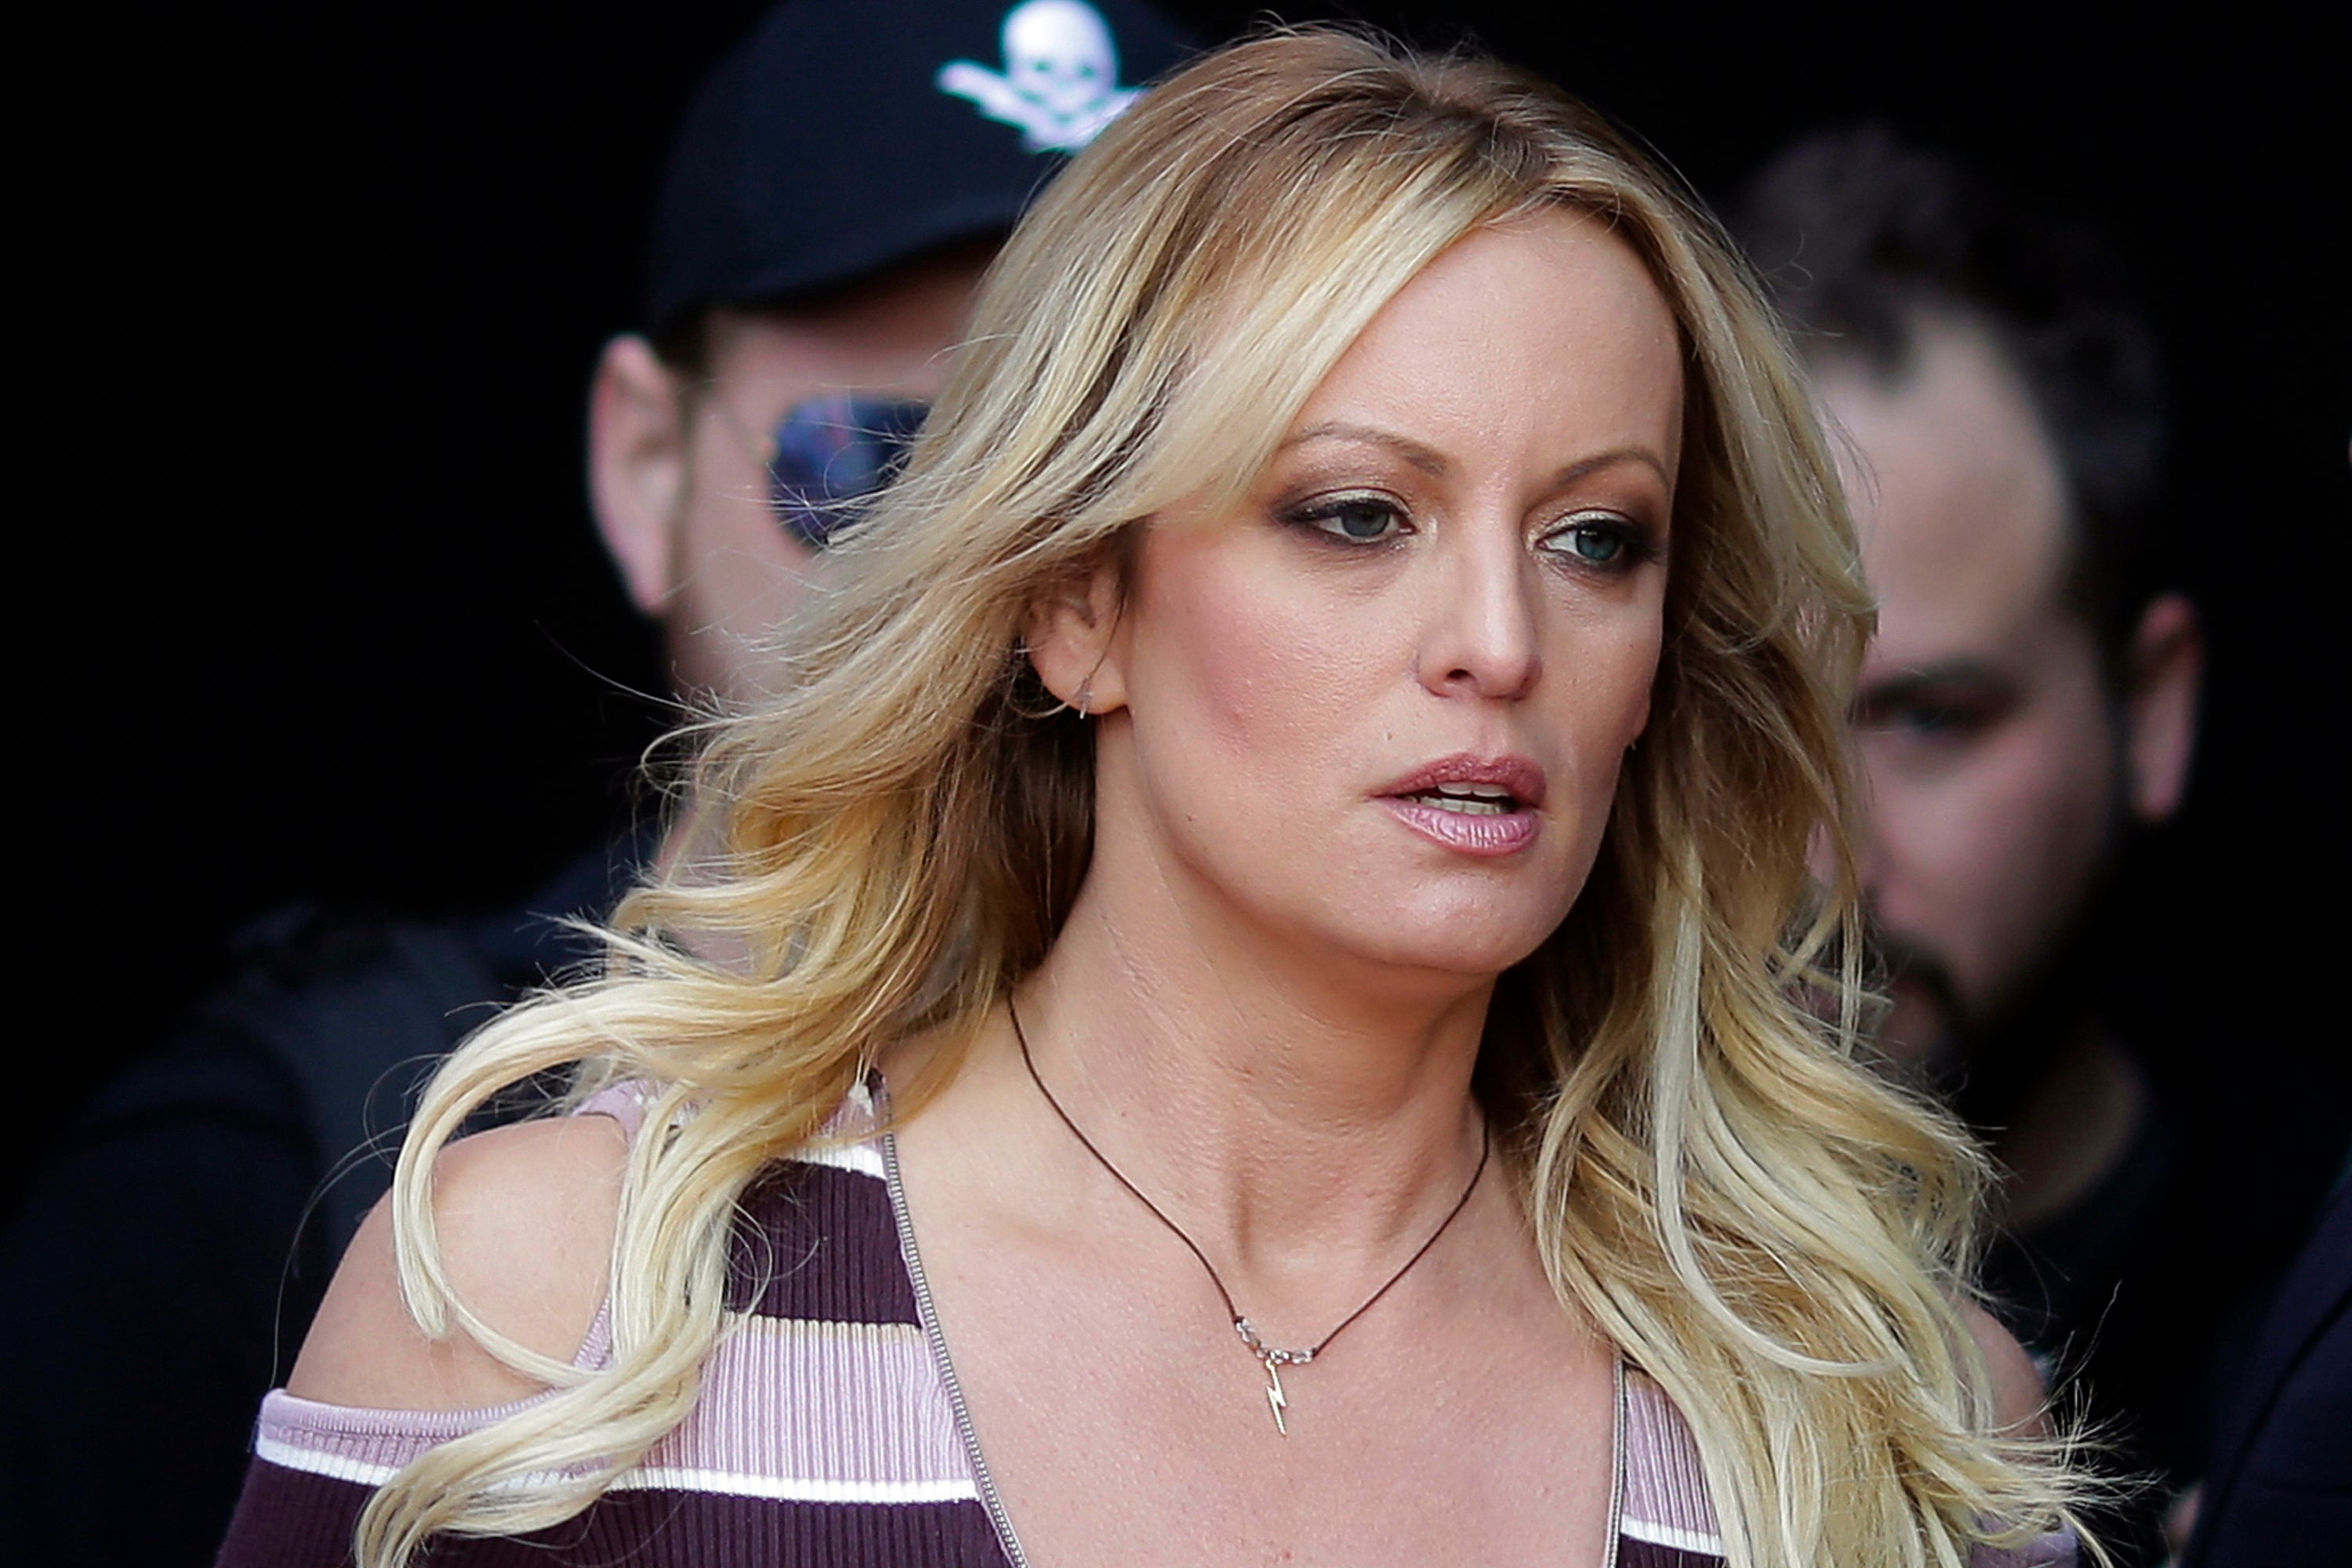 Adult film actress Stormy Daniels is at the centre of Trump’s charges